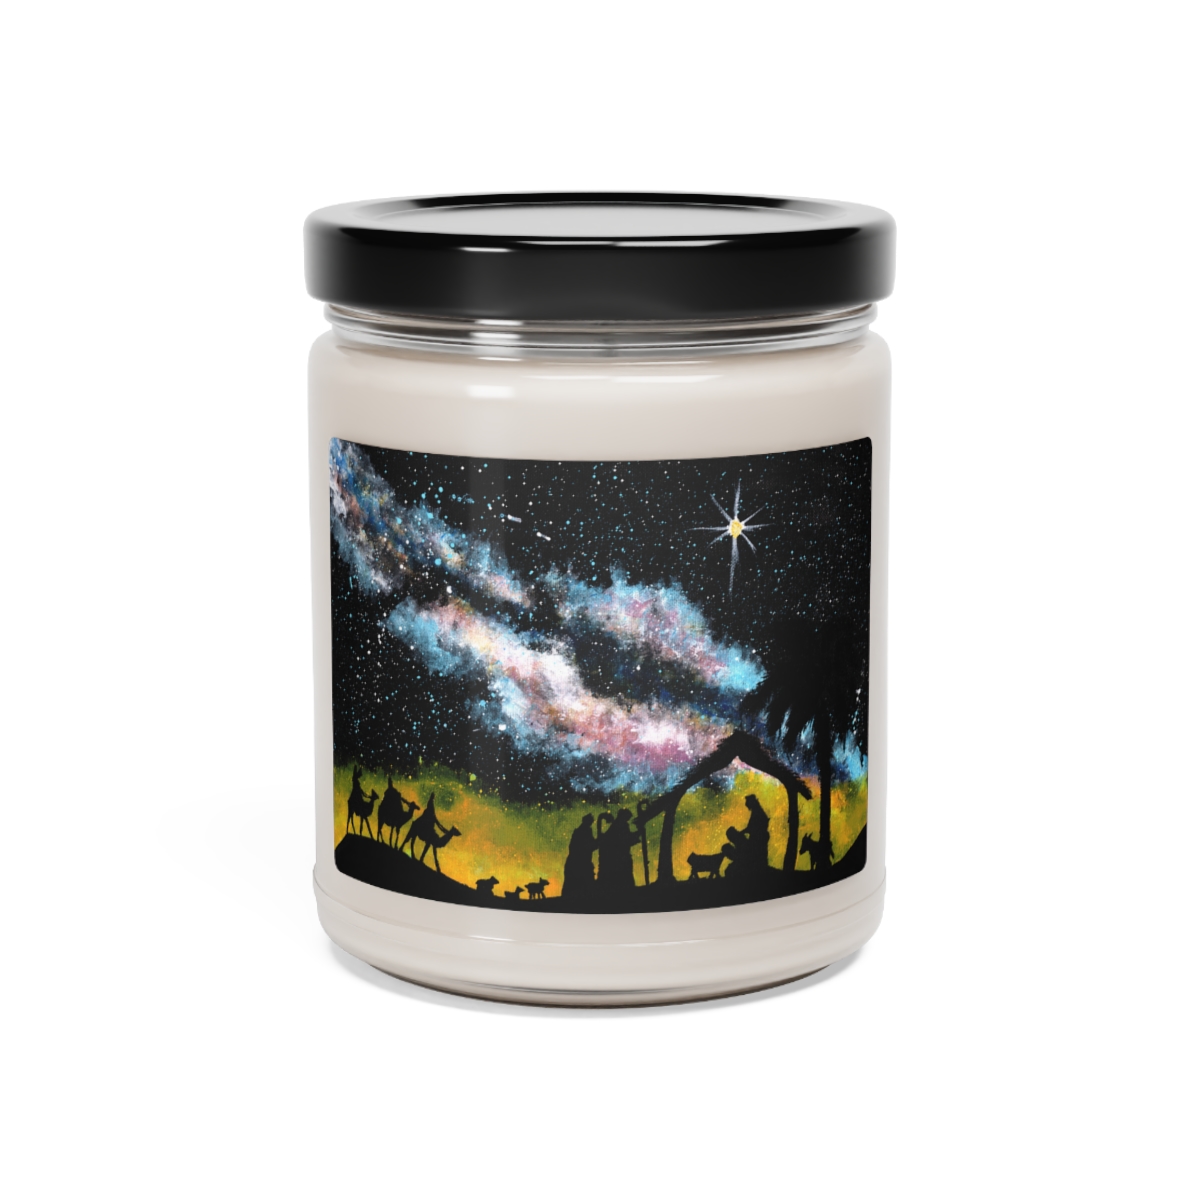 Some Seek Him - Christmas Warmth Scented Soy Candle, 9oz